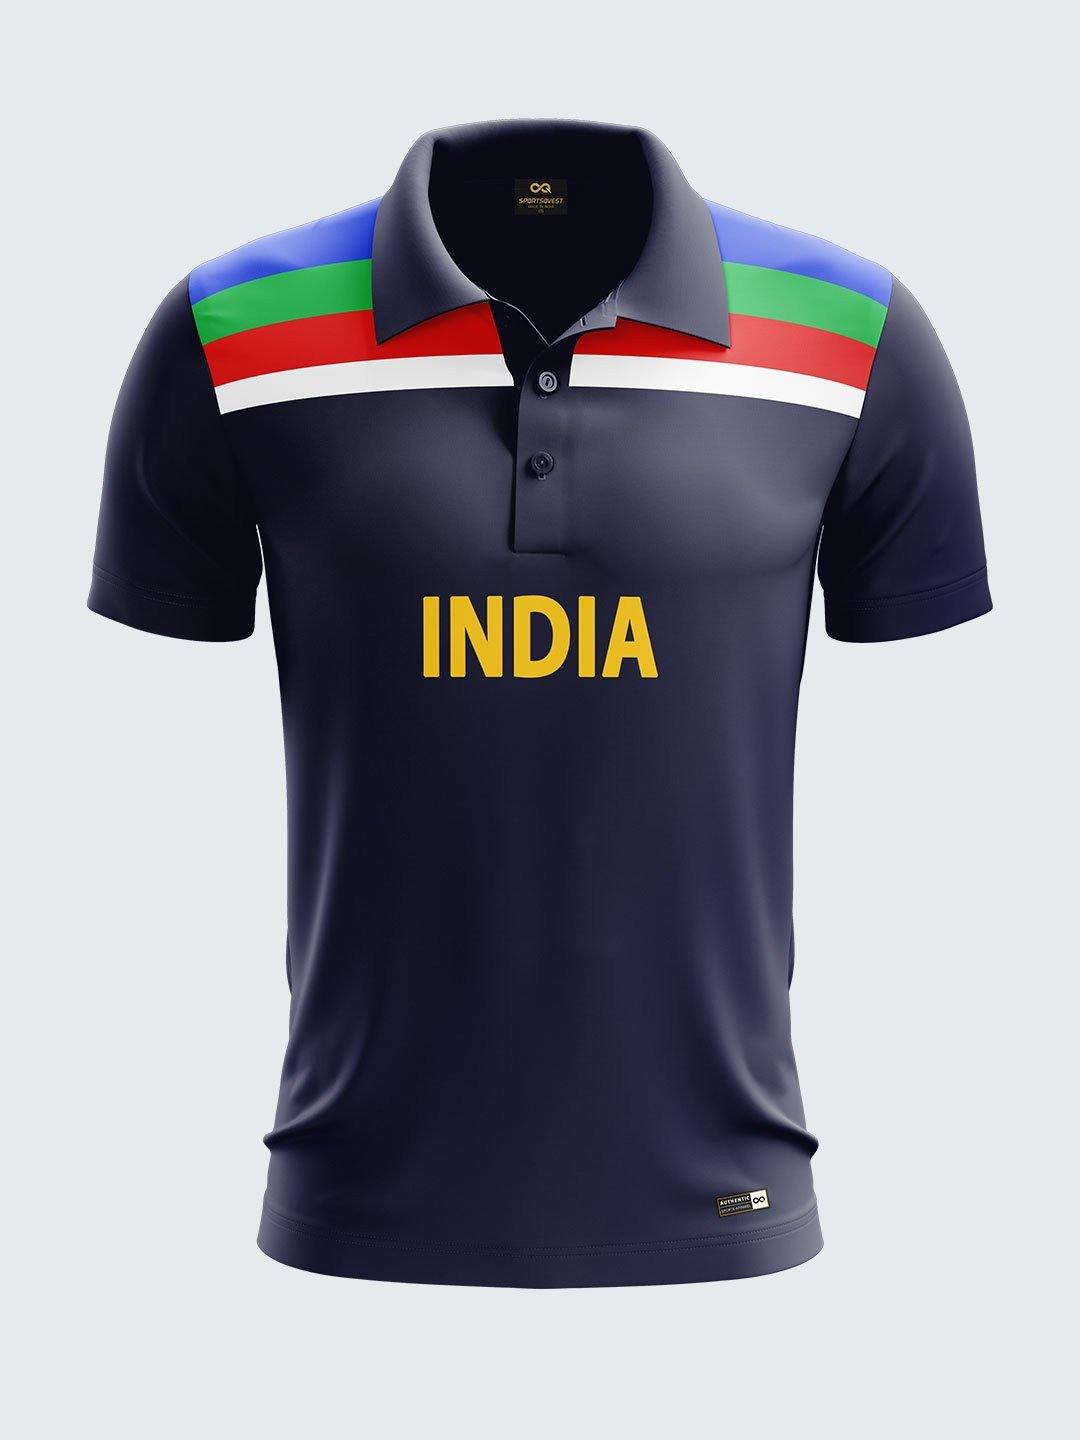 indian cricket team jersey 1992 world cup